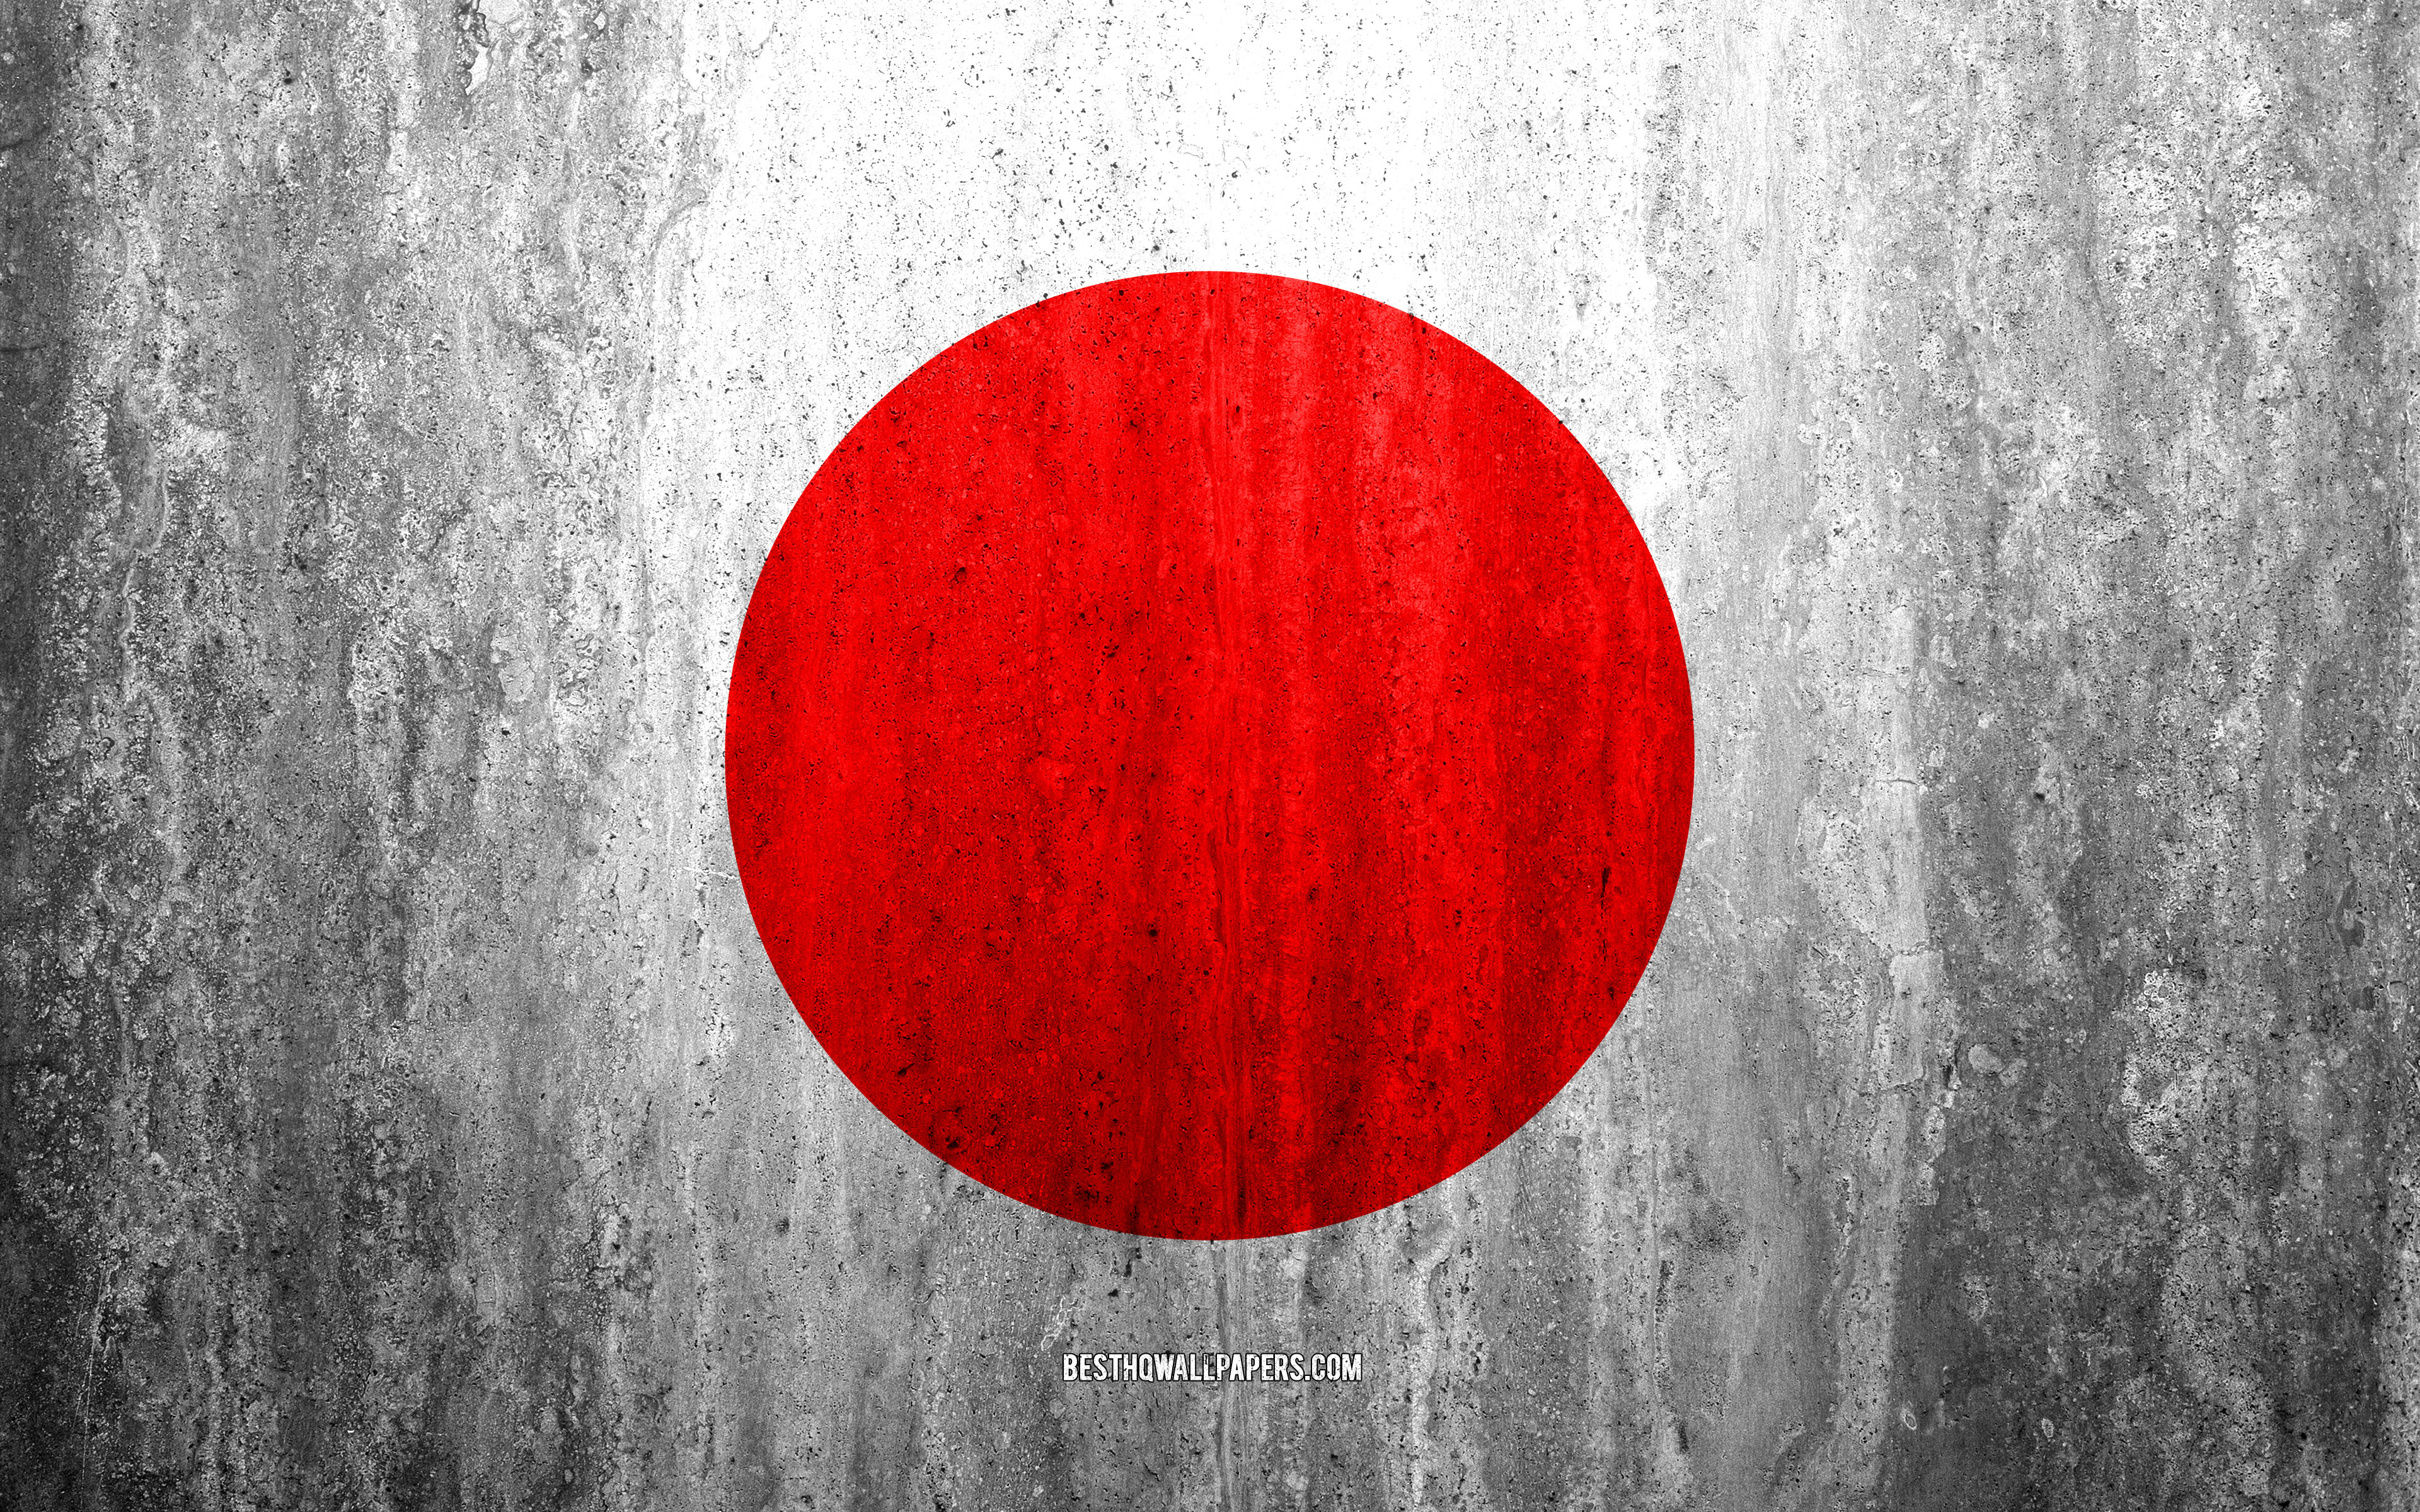 Download wallpaper Flag of Japan, 4k, stone background, grunge flag, Asia, Japanese flag, grunge art, national symbols, Japan, stone texture for desktop with resolution 3840x2400. High Quality HD picture wallpaper